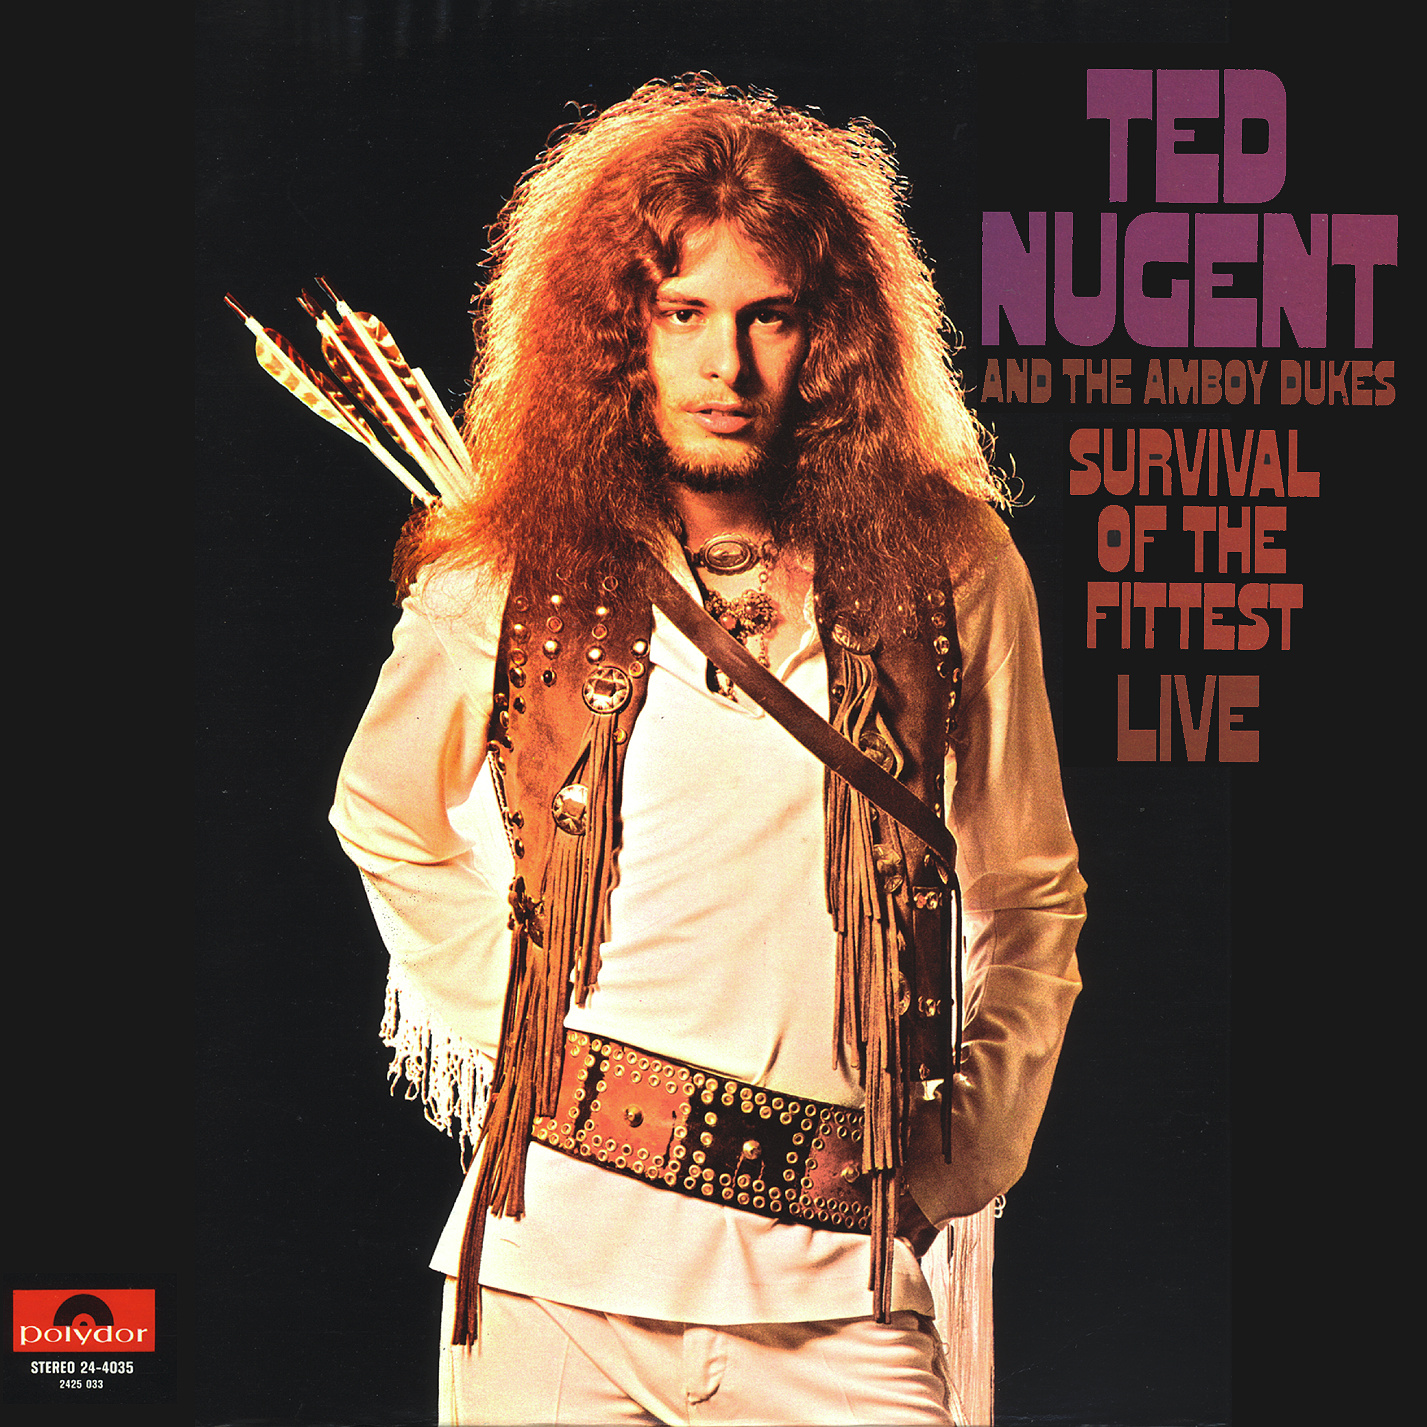 Ted Nugent & the Amboy Dukes Survival Of The Fittest 1970